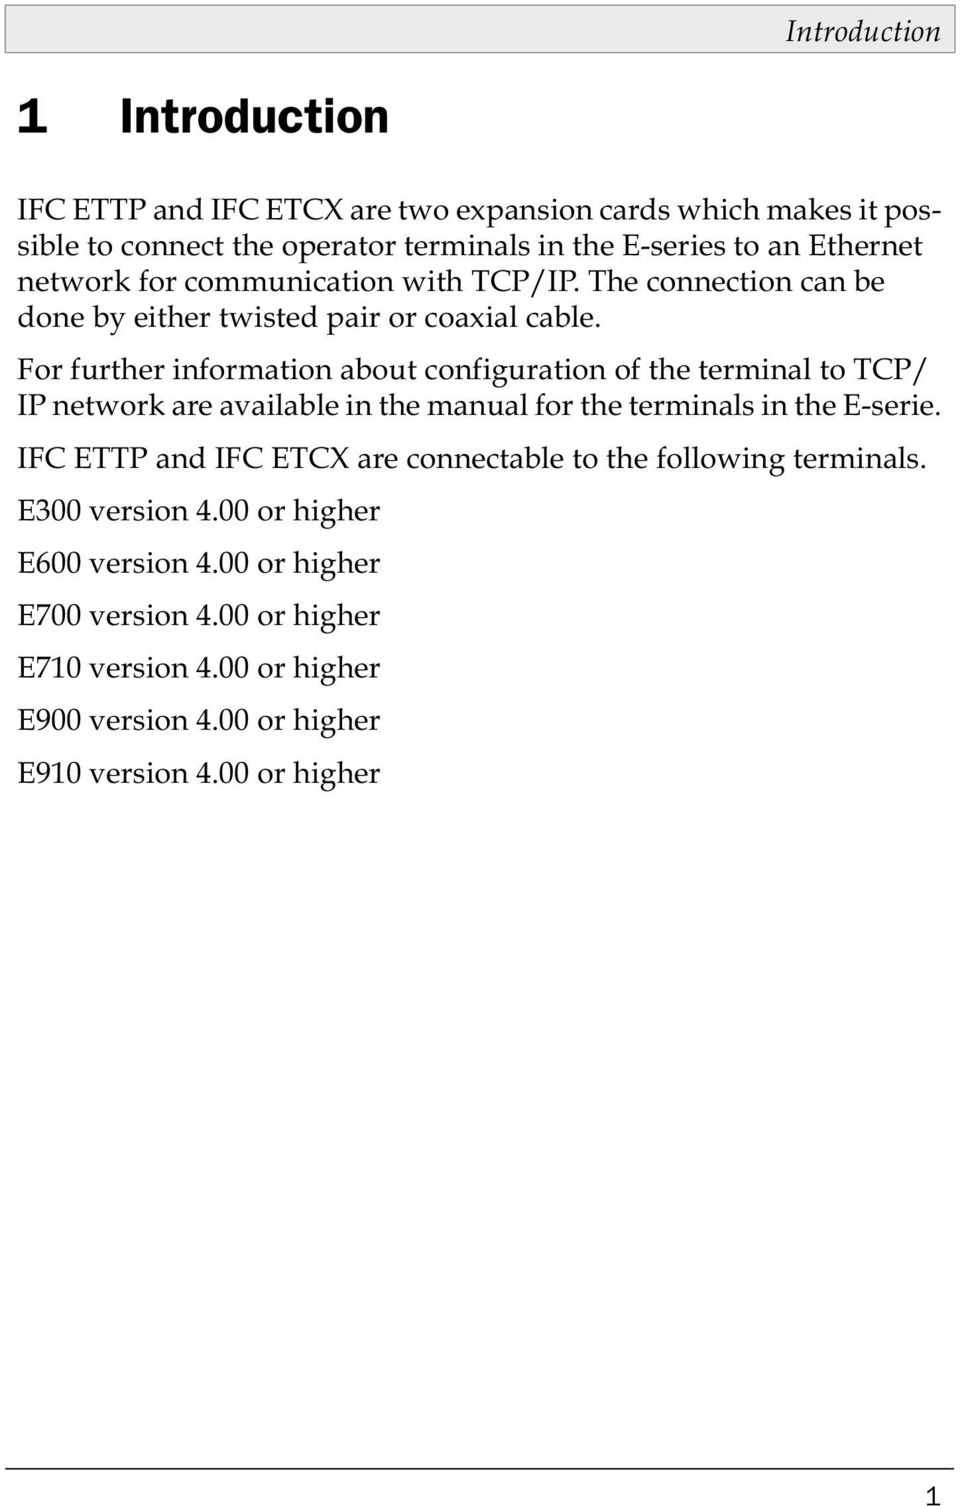 For further information about configuration of the terminal to TCP/ IP network are available in the manual for the terminals in the E-serie.